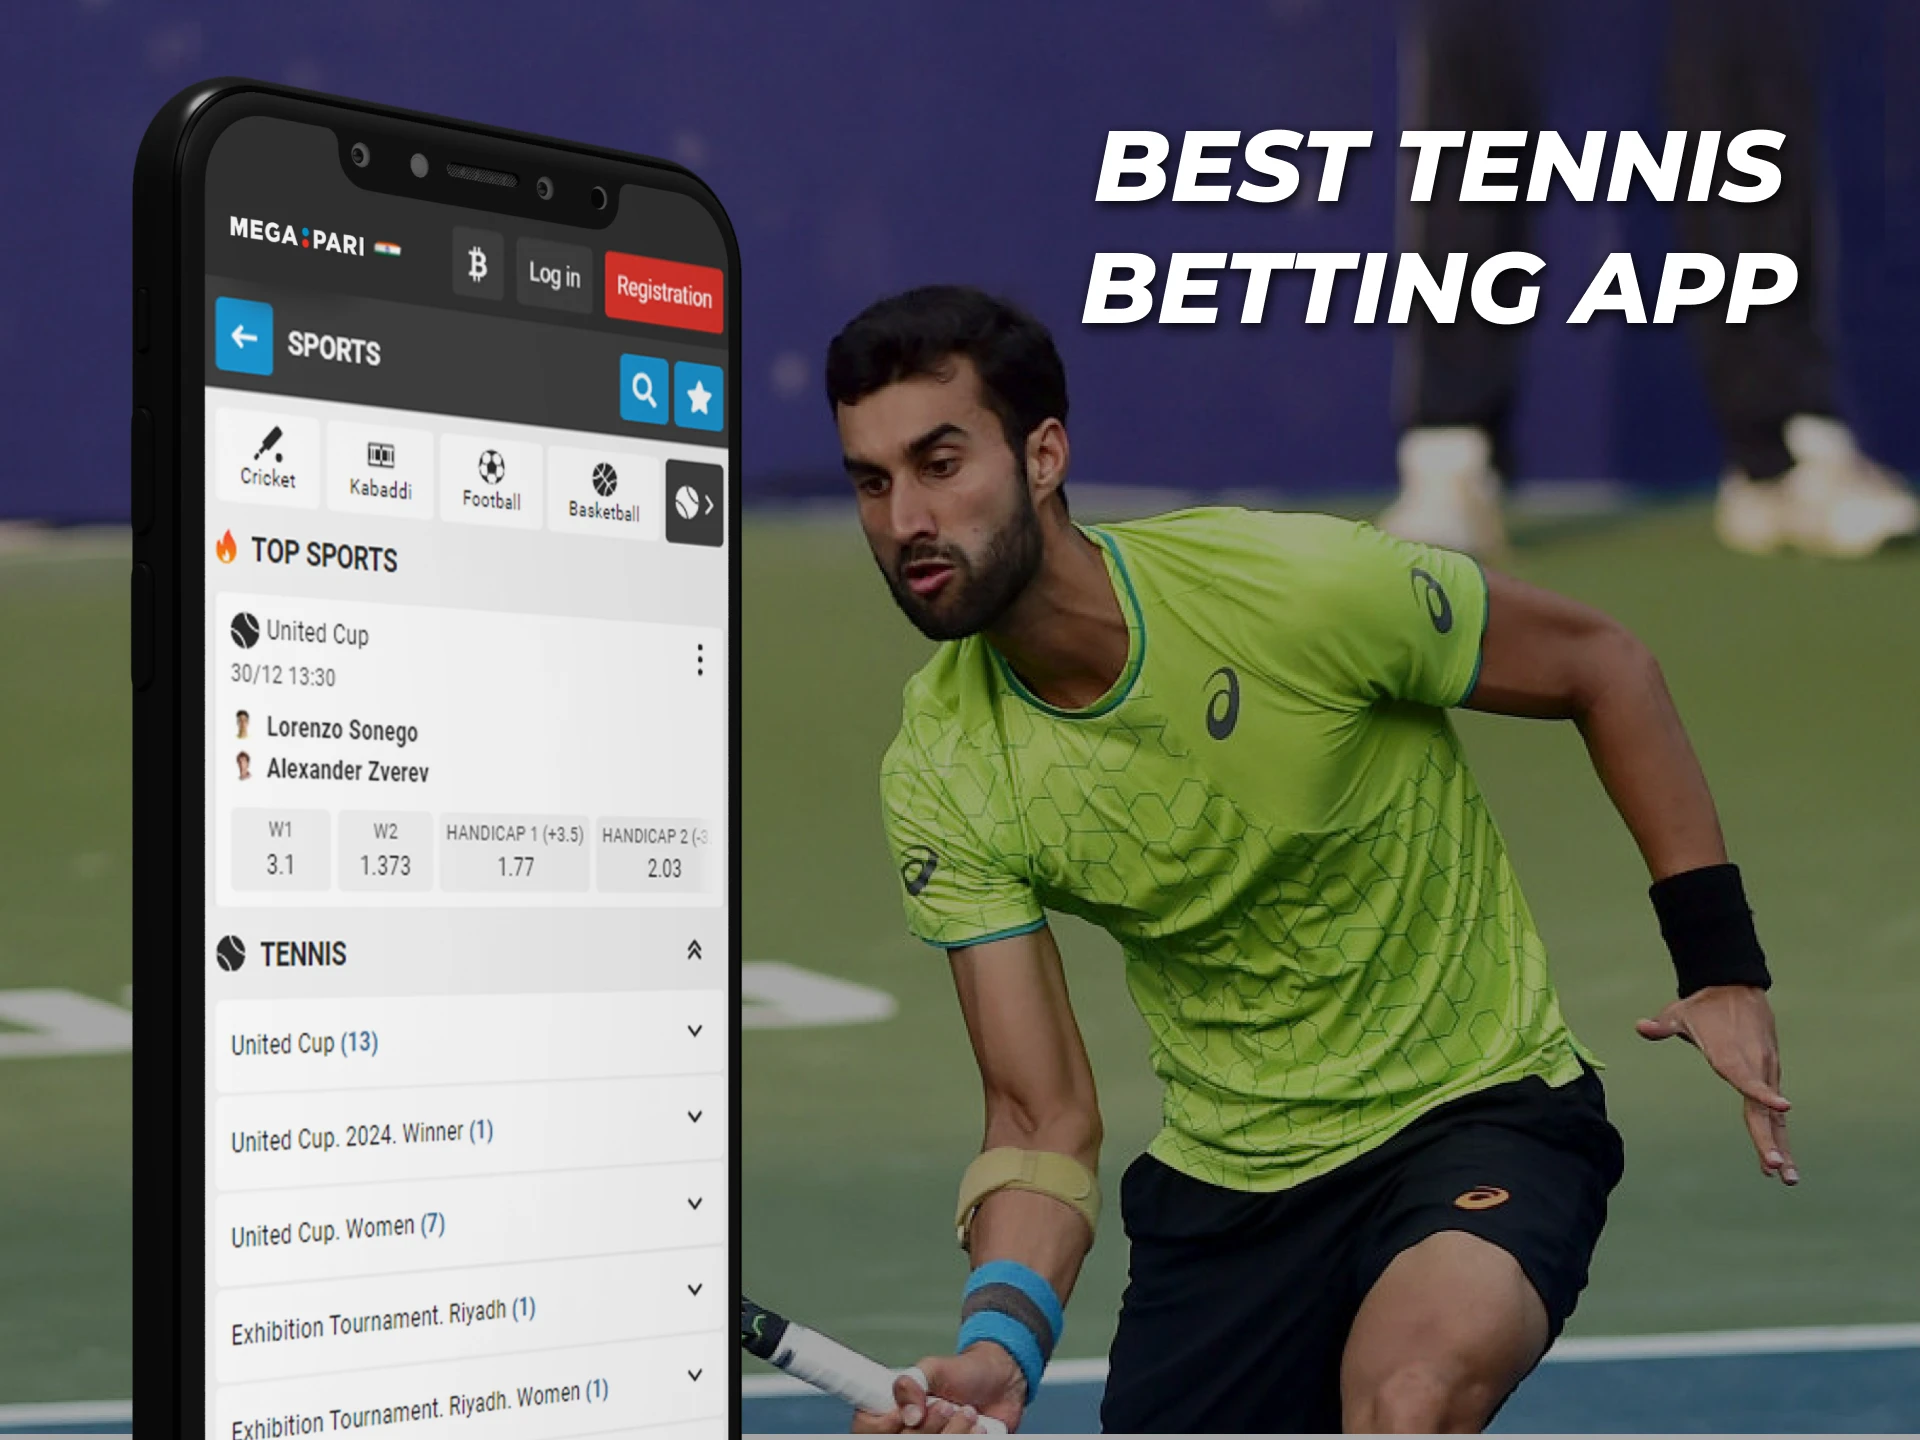 If you are looking for the best tennis betting app, choose one from our list.